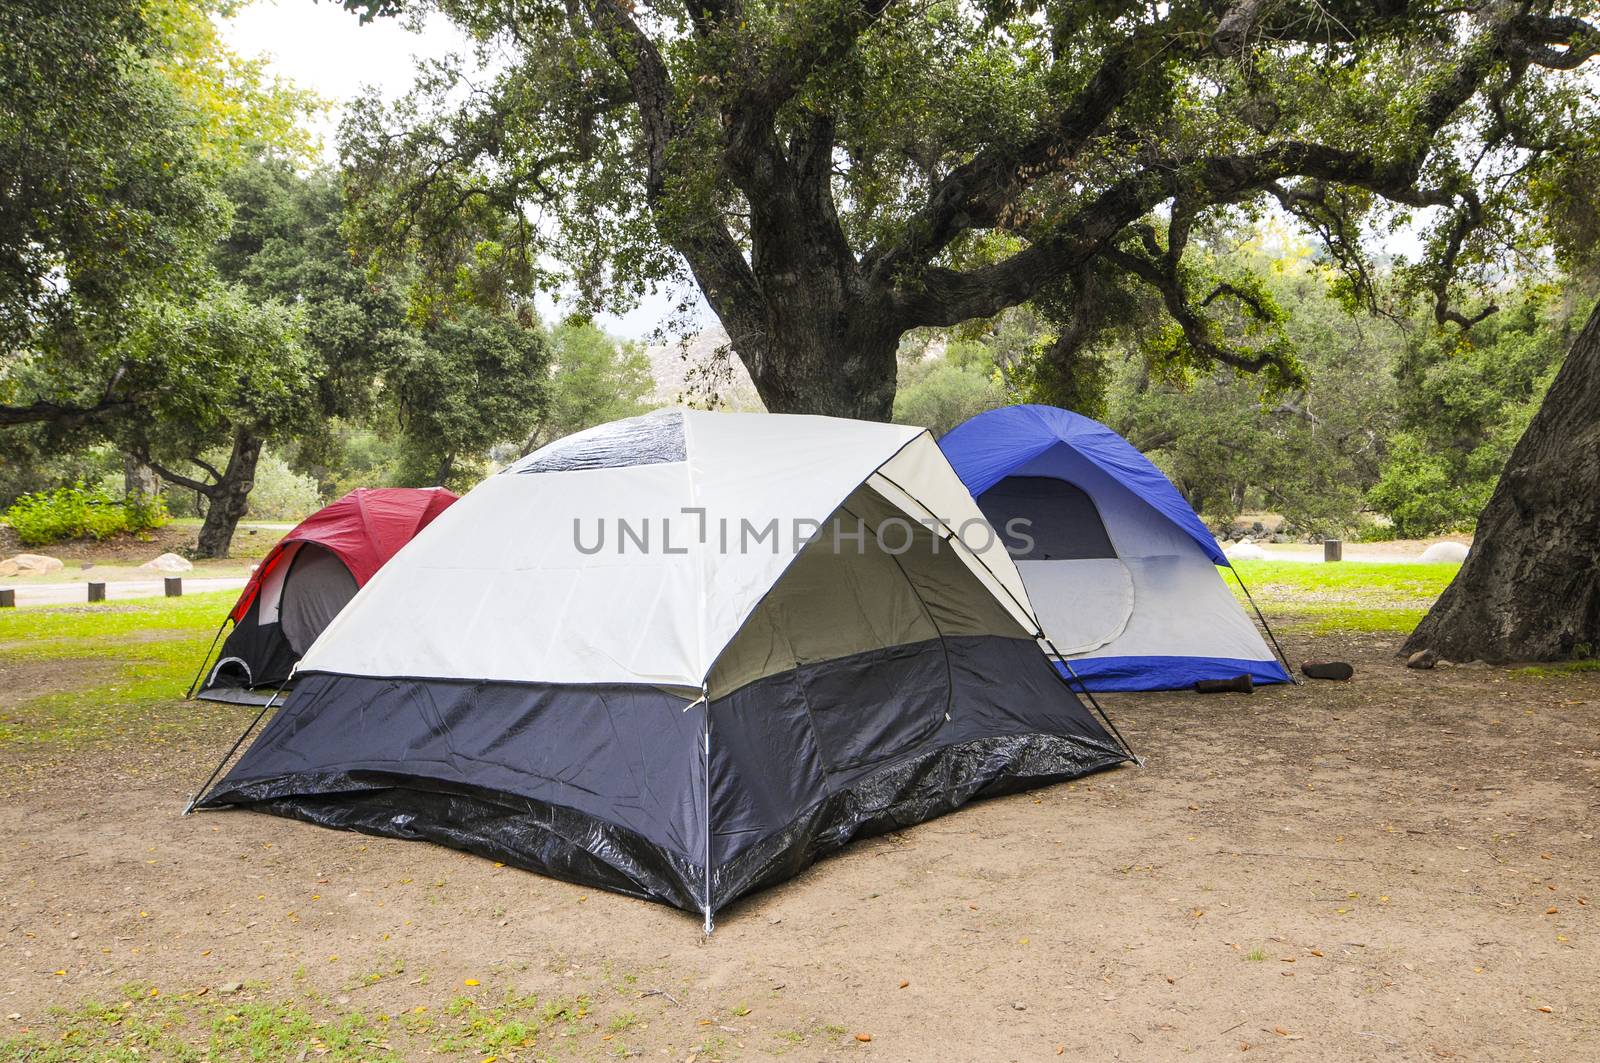 Tents ready for camping in California campground